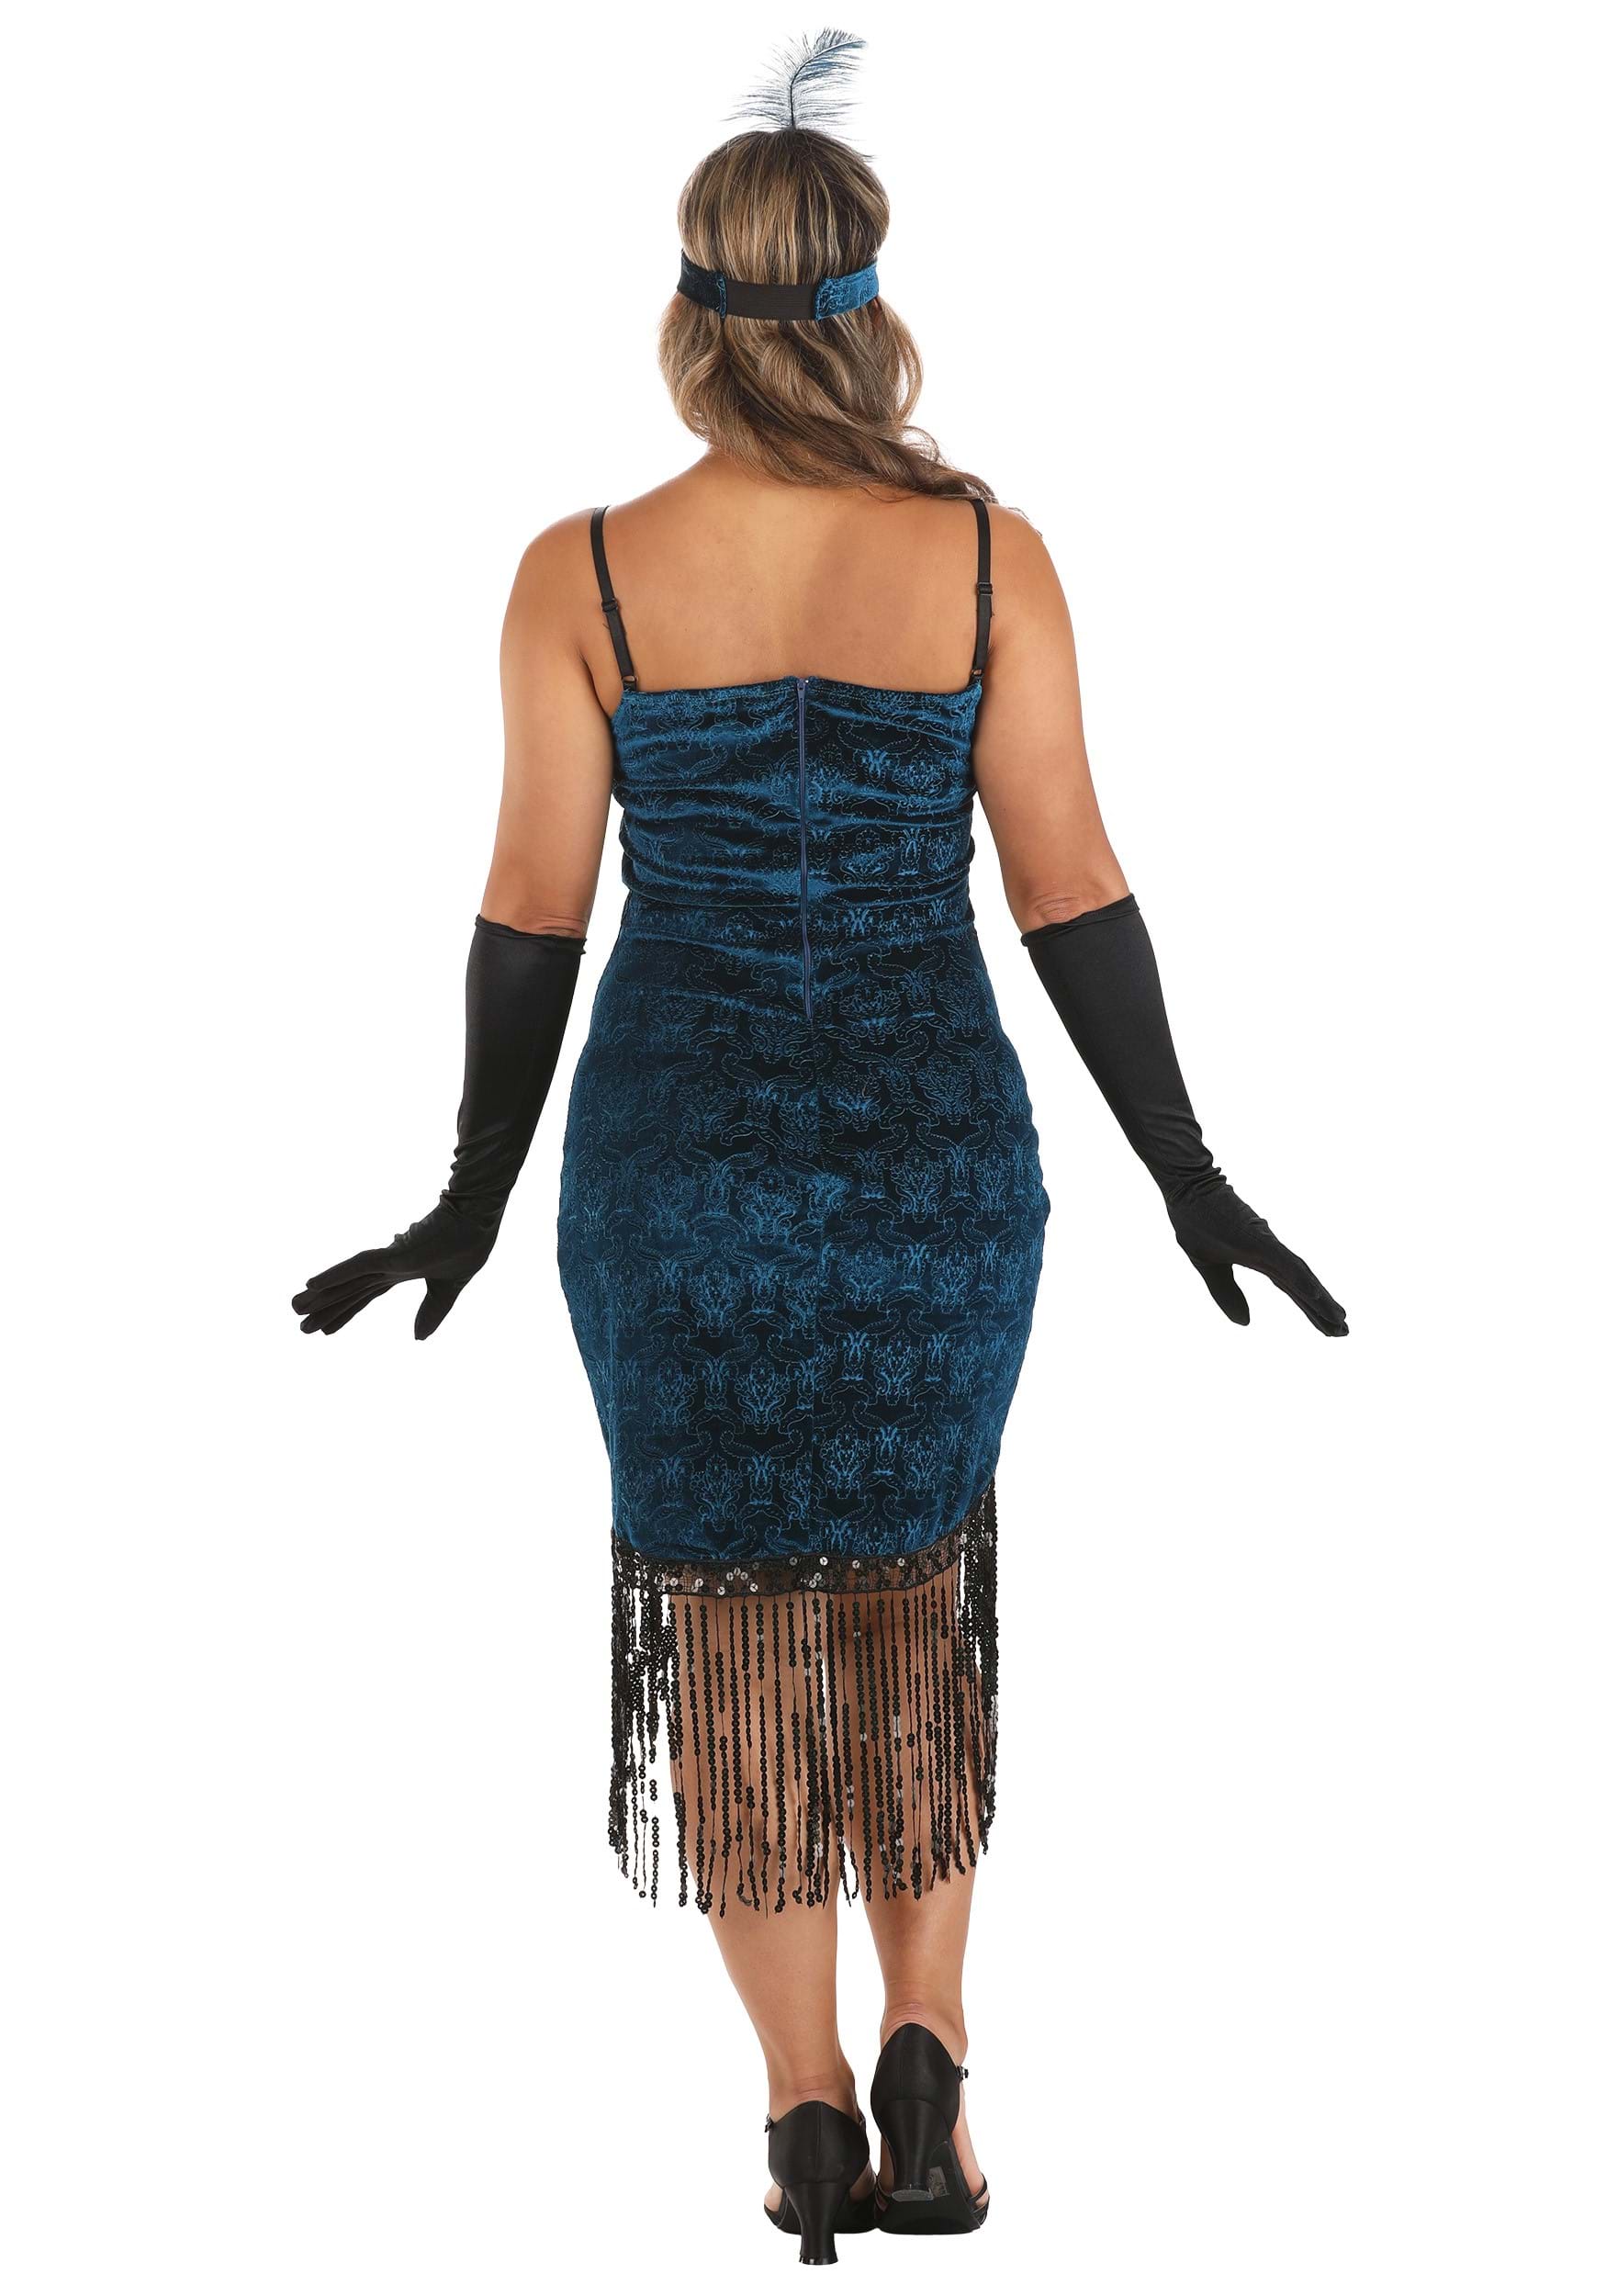 Women's Dolled Up Flapper Costume